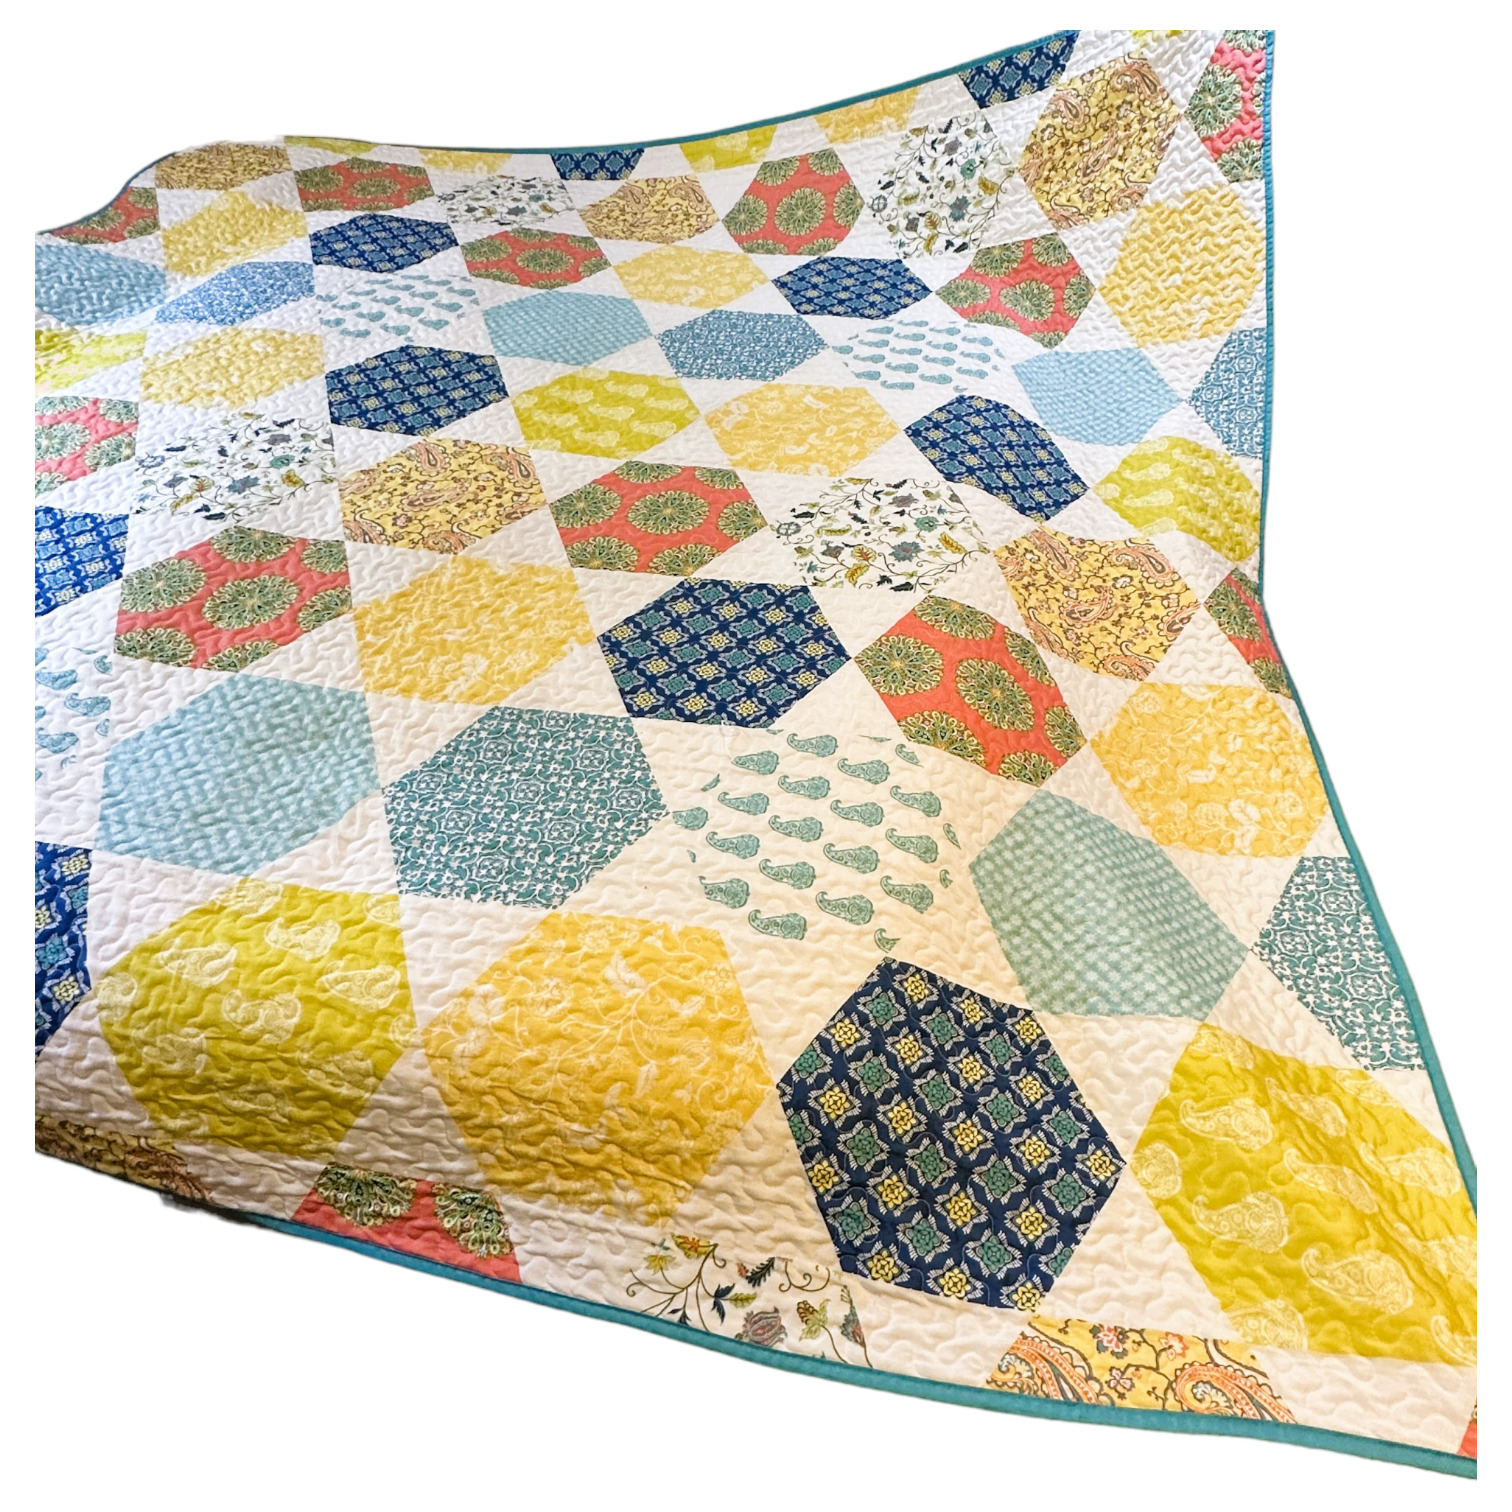 Mainstays Quilt Brights, Pastels Turquoises Blue, Yellow, Golds, Corals, 86